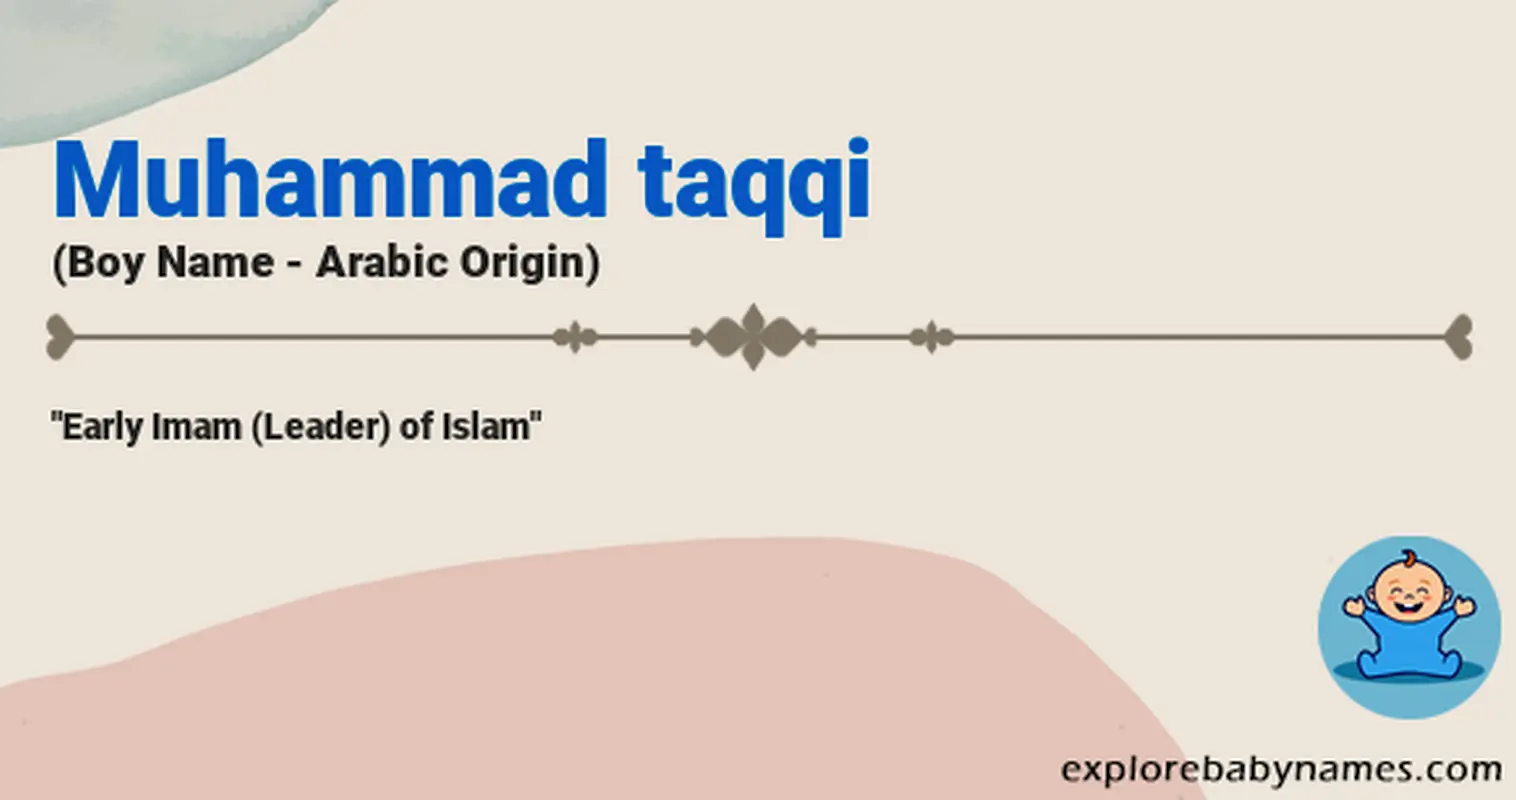 Meaning of Muhammad taqqi